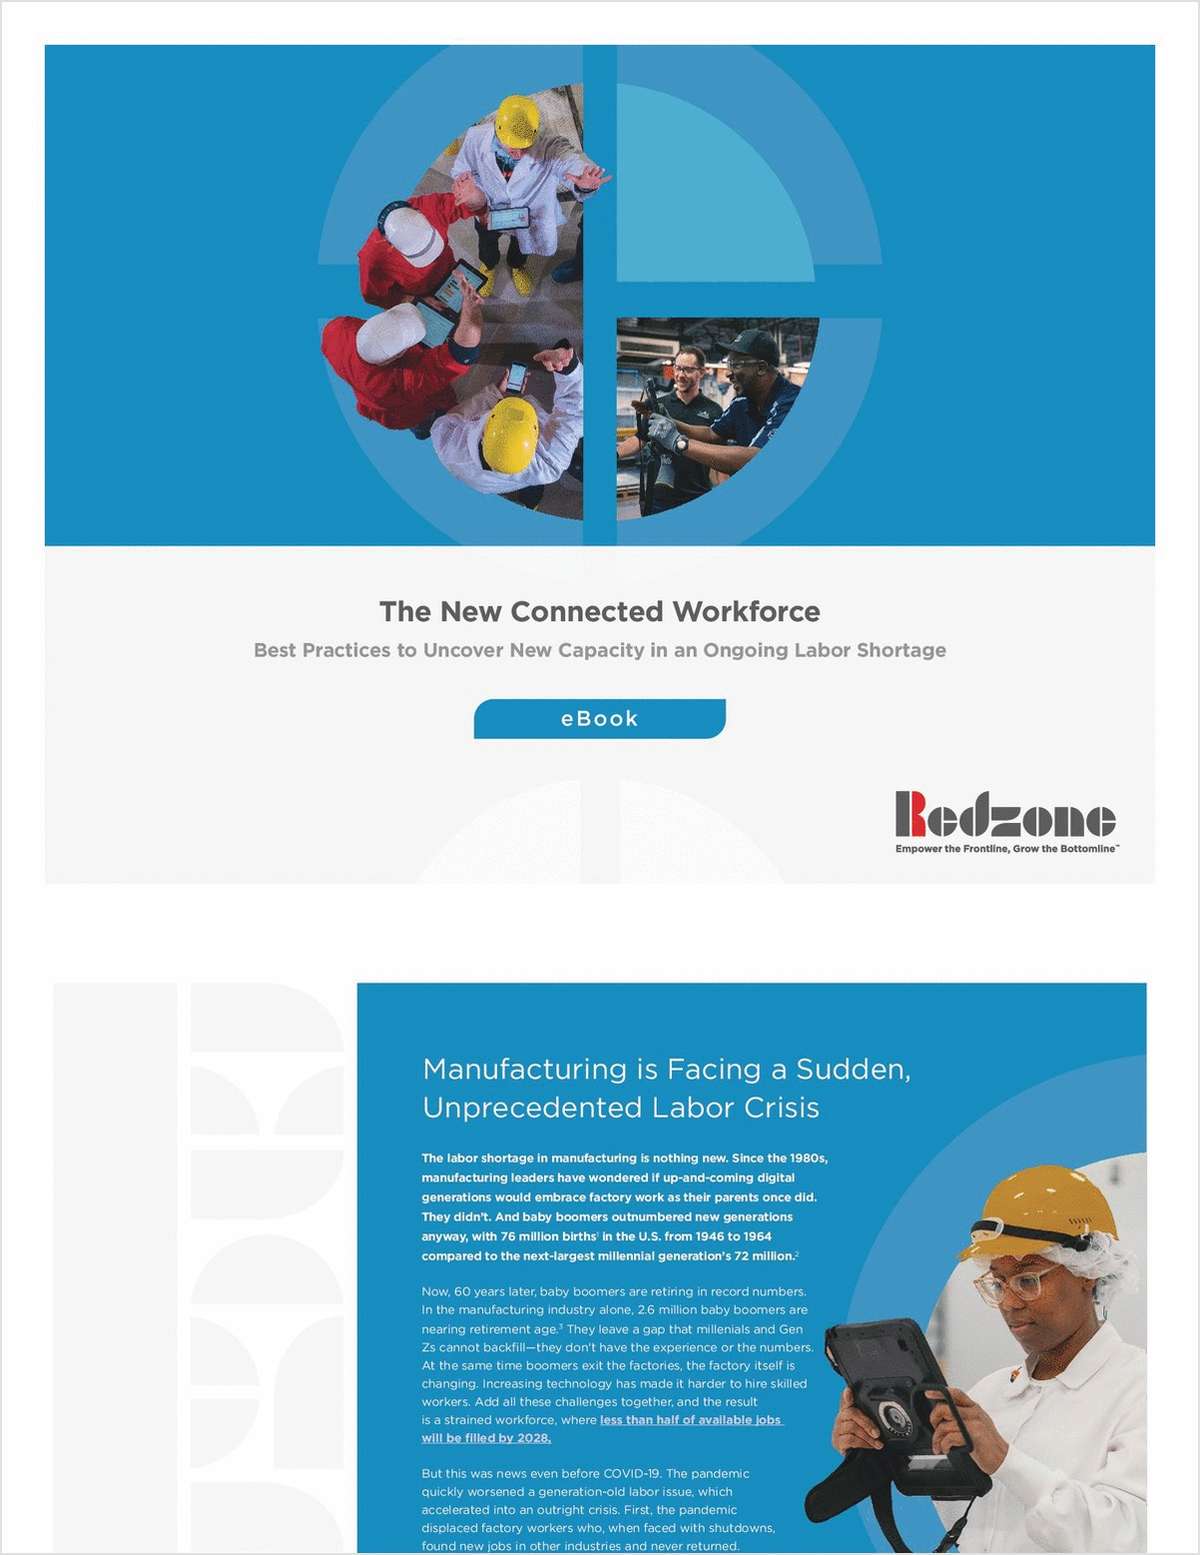 eBook: The New Connected Workforce